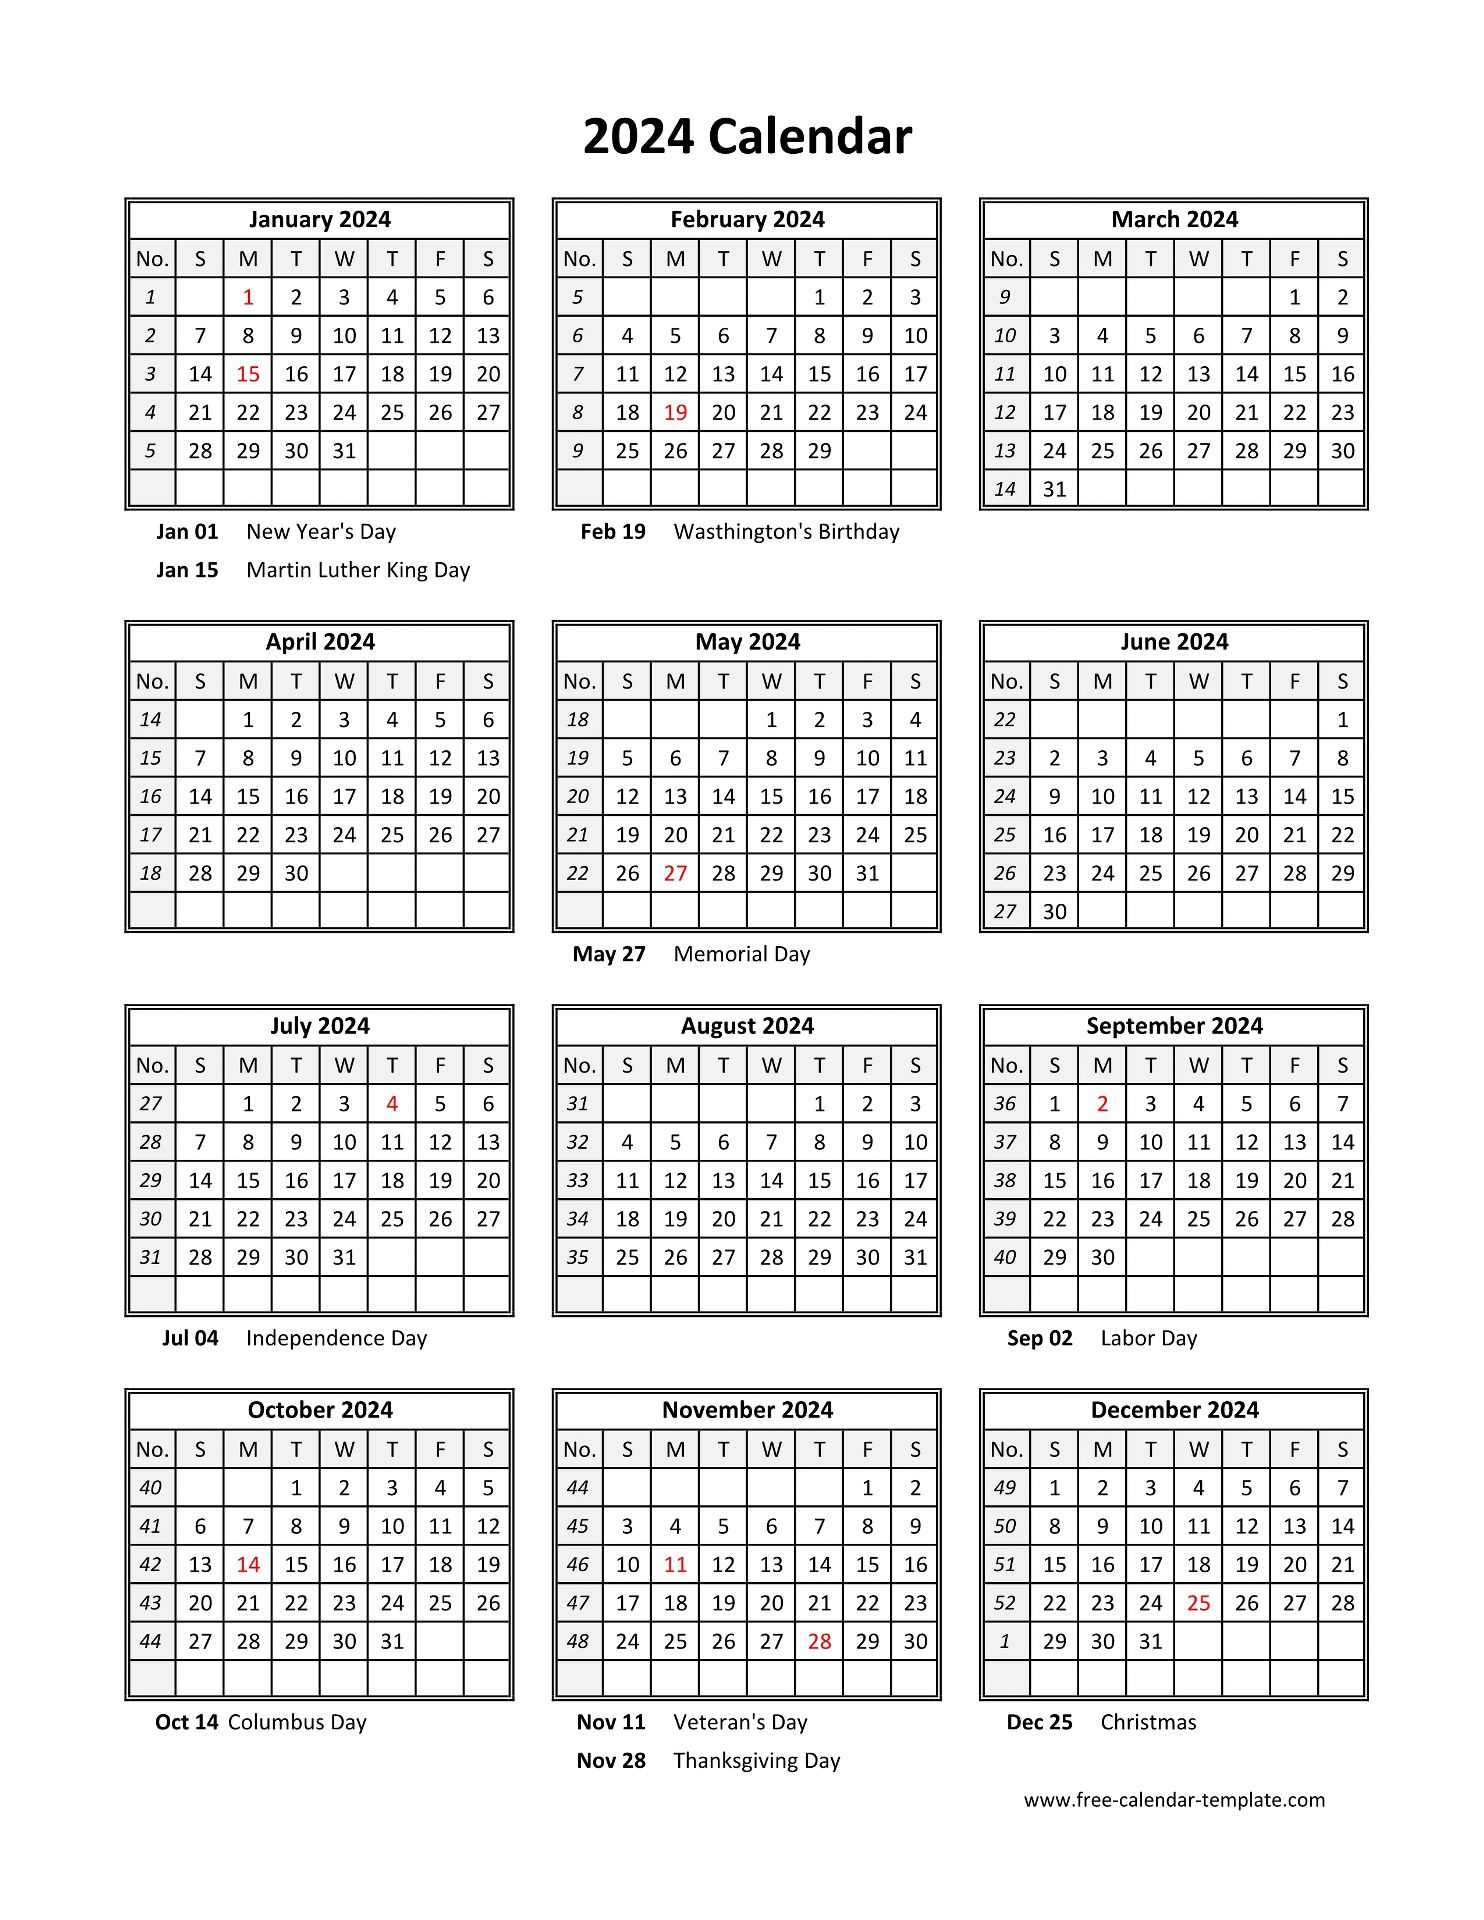 Yearly Printable Calendar 2024 With Holidays | Free-Calendar | Printable Calendar 2024 One Page Pdf